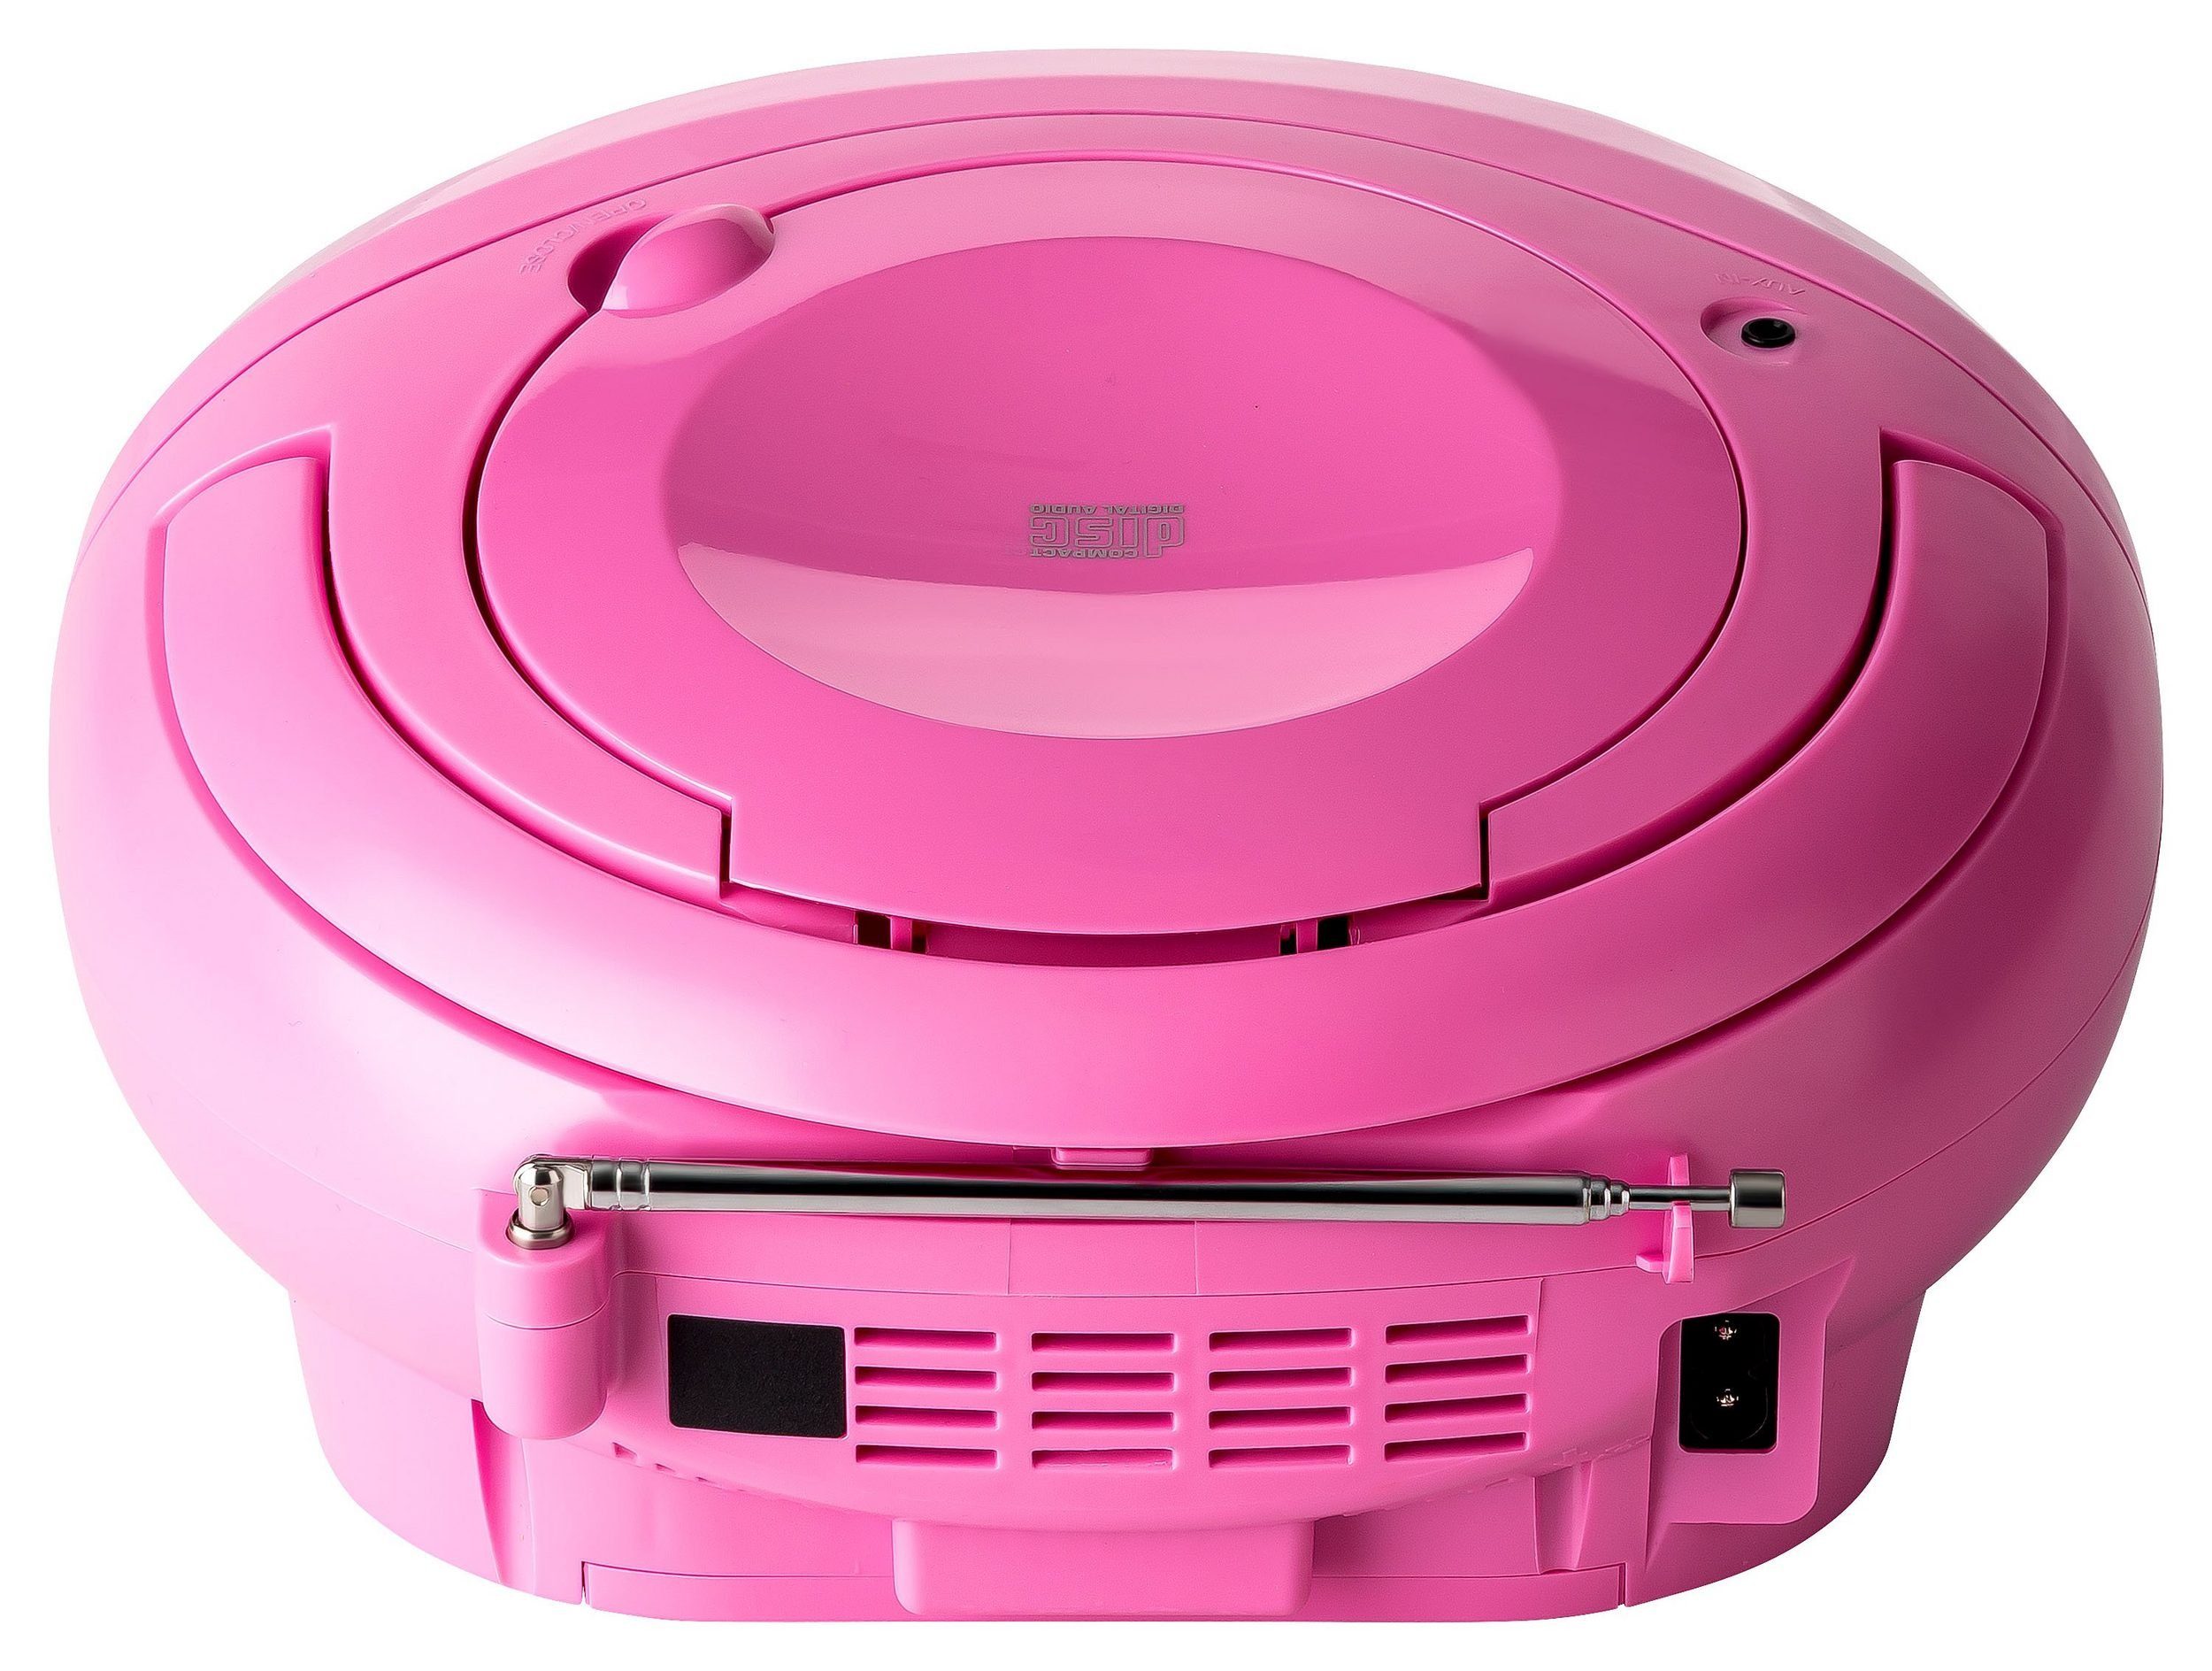 Reflexion CDR614 Boombox (UKW PLL Radio, Tracks) pink (CD: 16,00 20 W, Programmier-Funktion Stereo CD-Player mit Radio